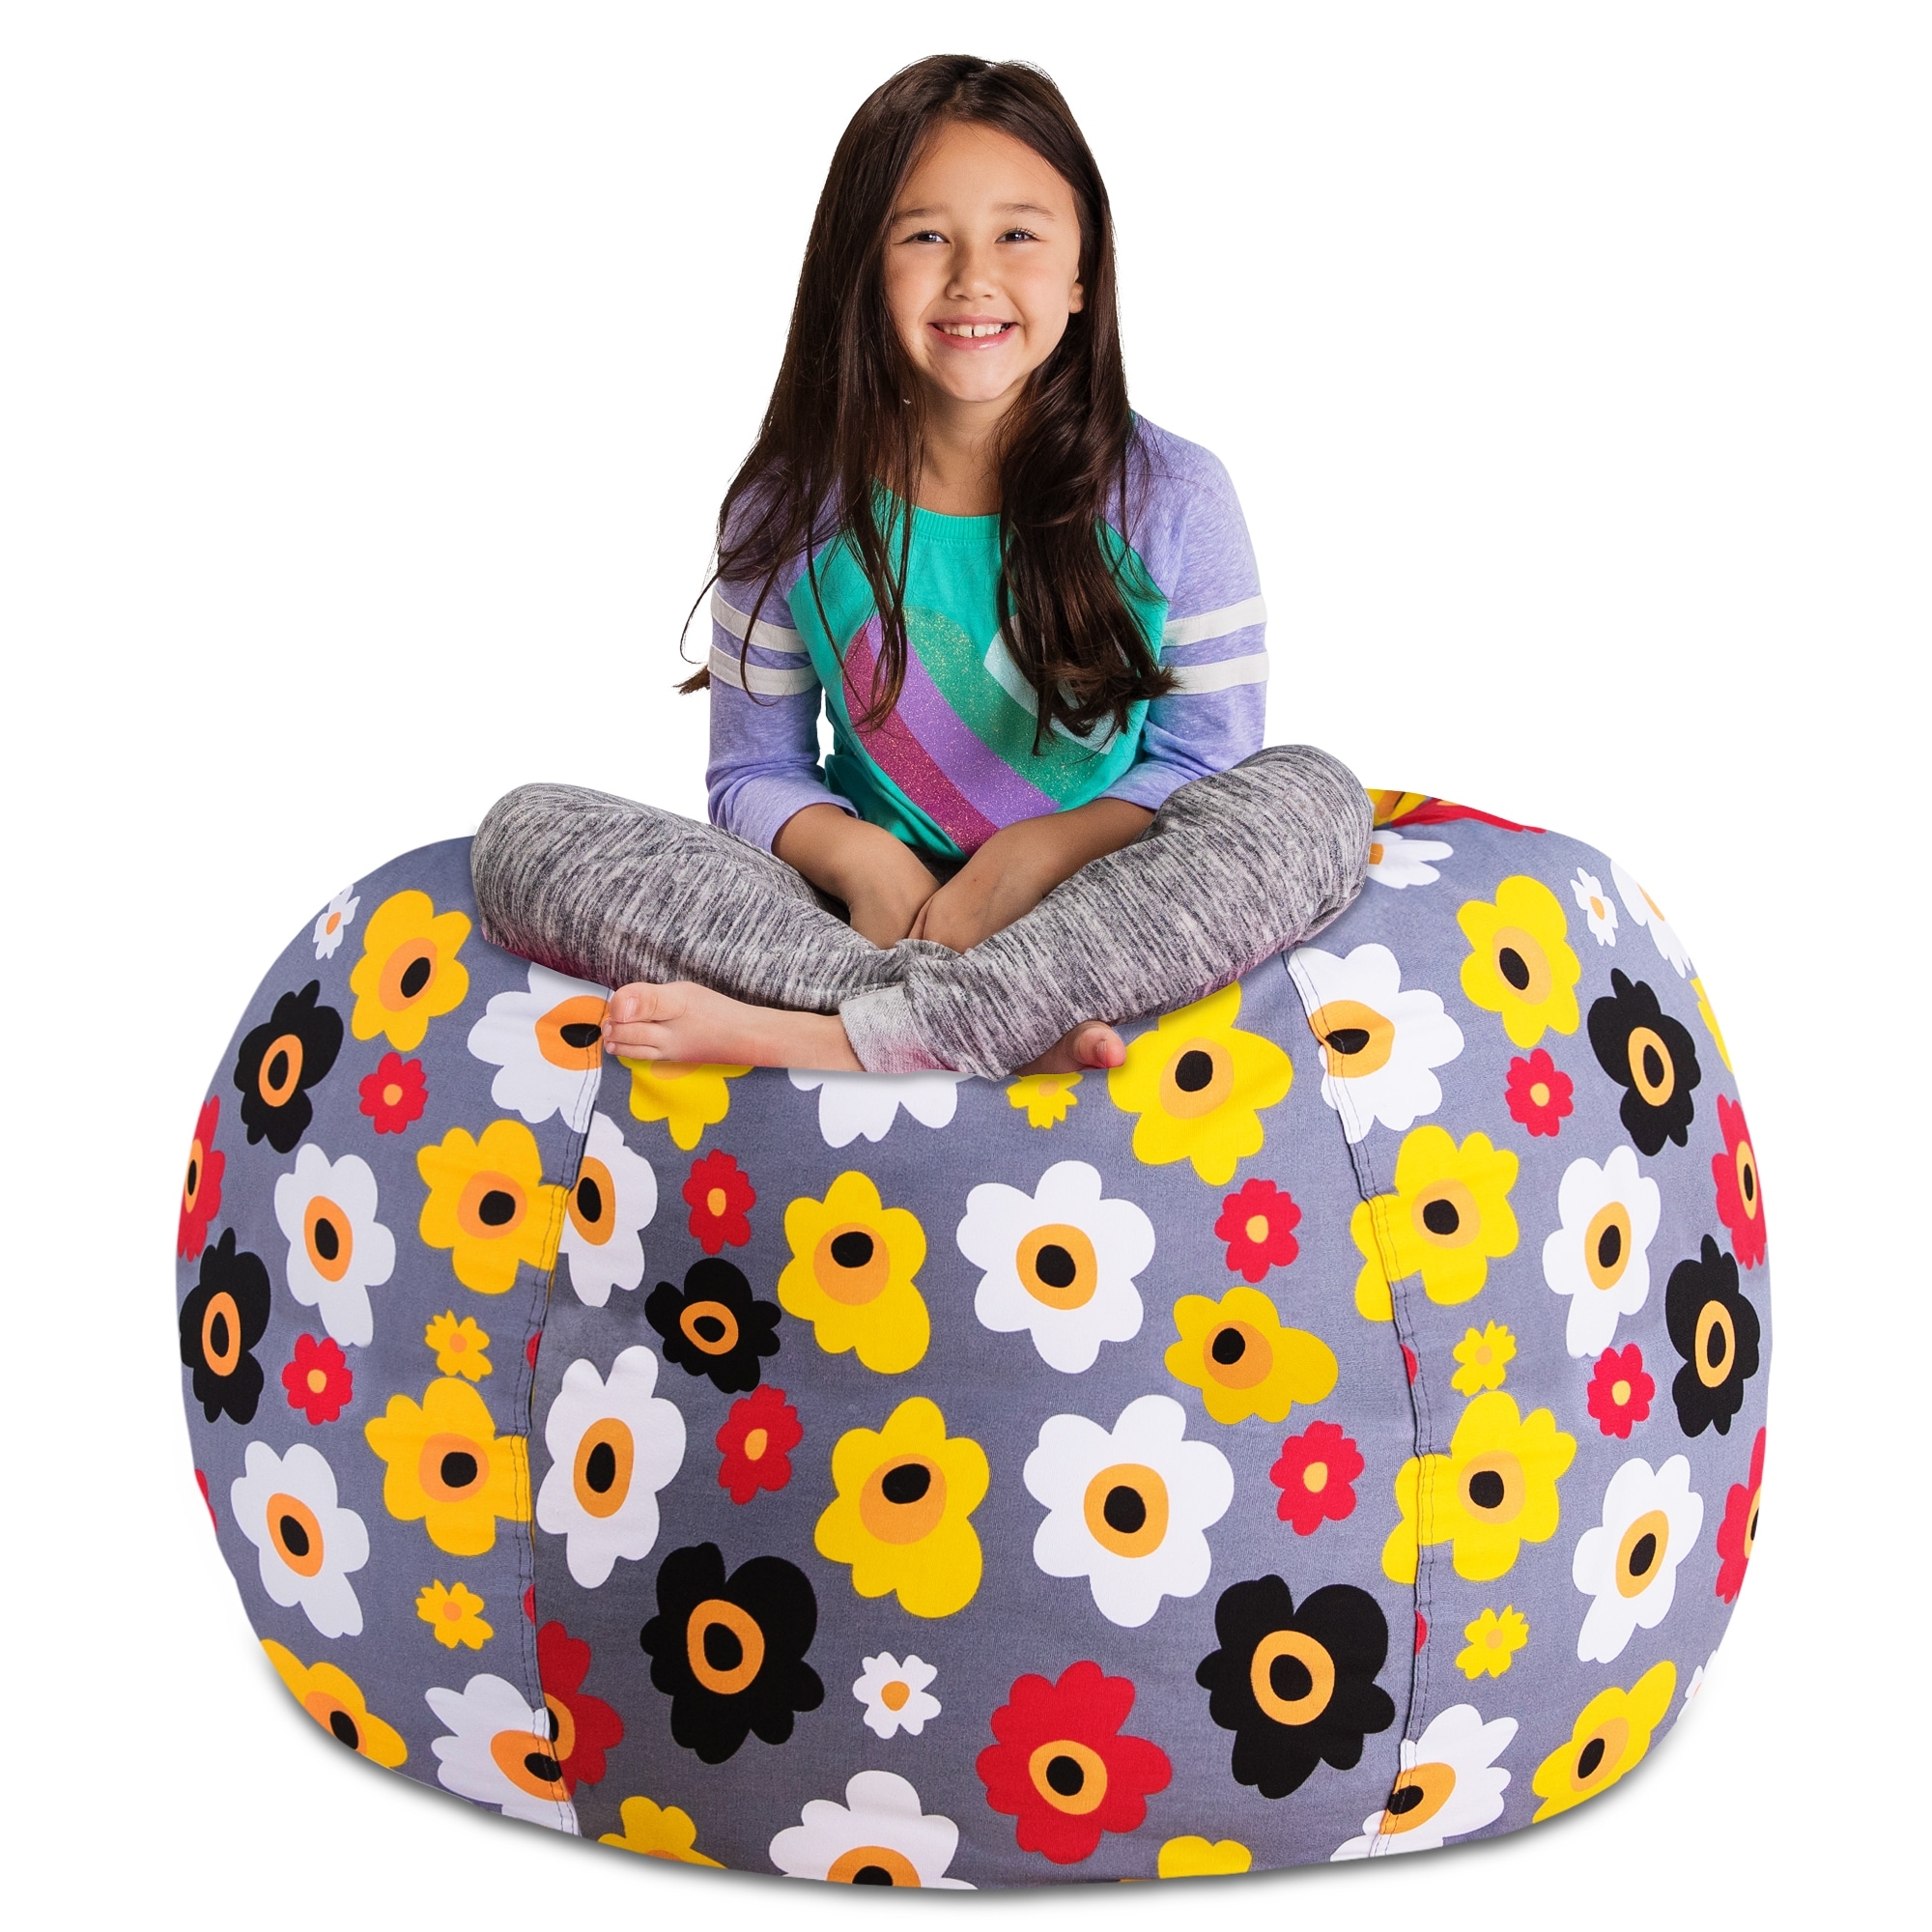 RTMX&kk Extra Large Bean Bag Chair Cover Stuffed Animal Storage Bean Bag  Chair Cover for Kids Room Stuff and Sit Storage Bean Bag 4.5/5/6FT (Cover